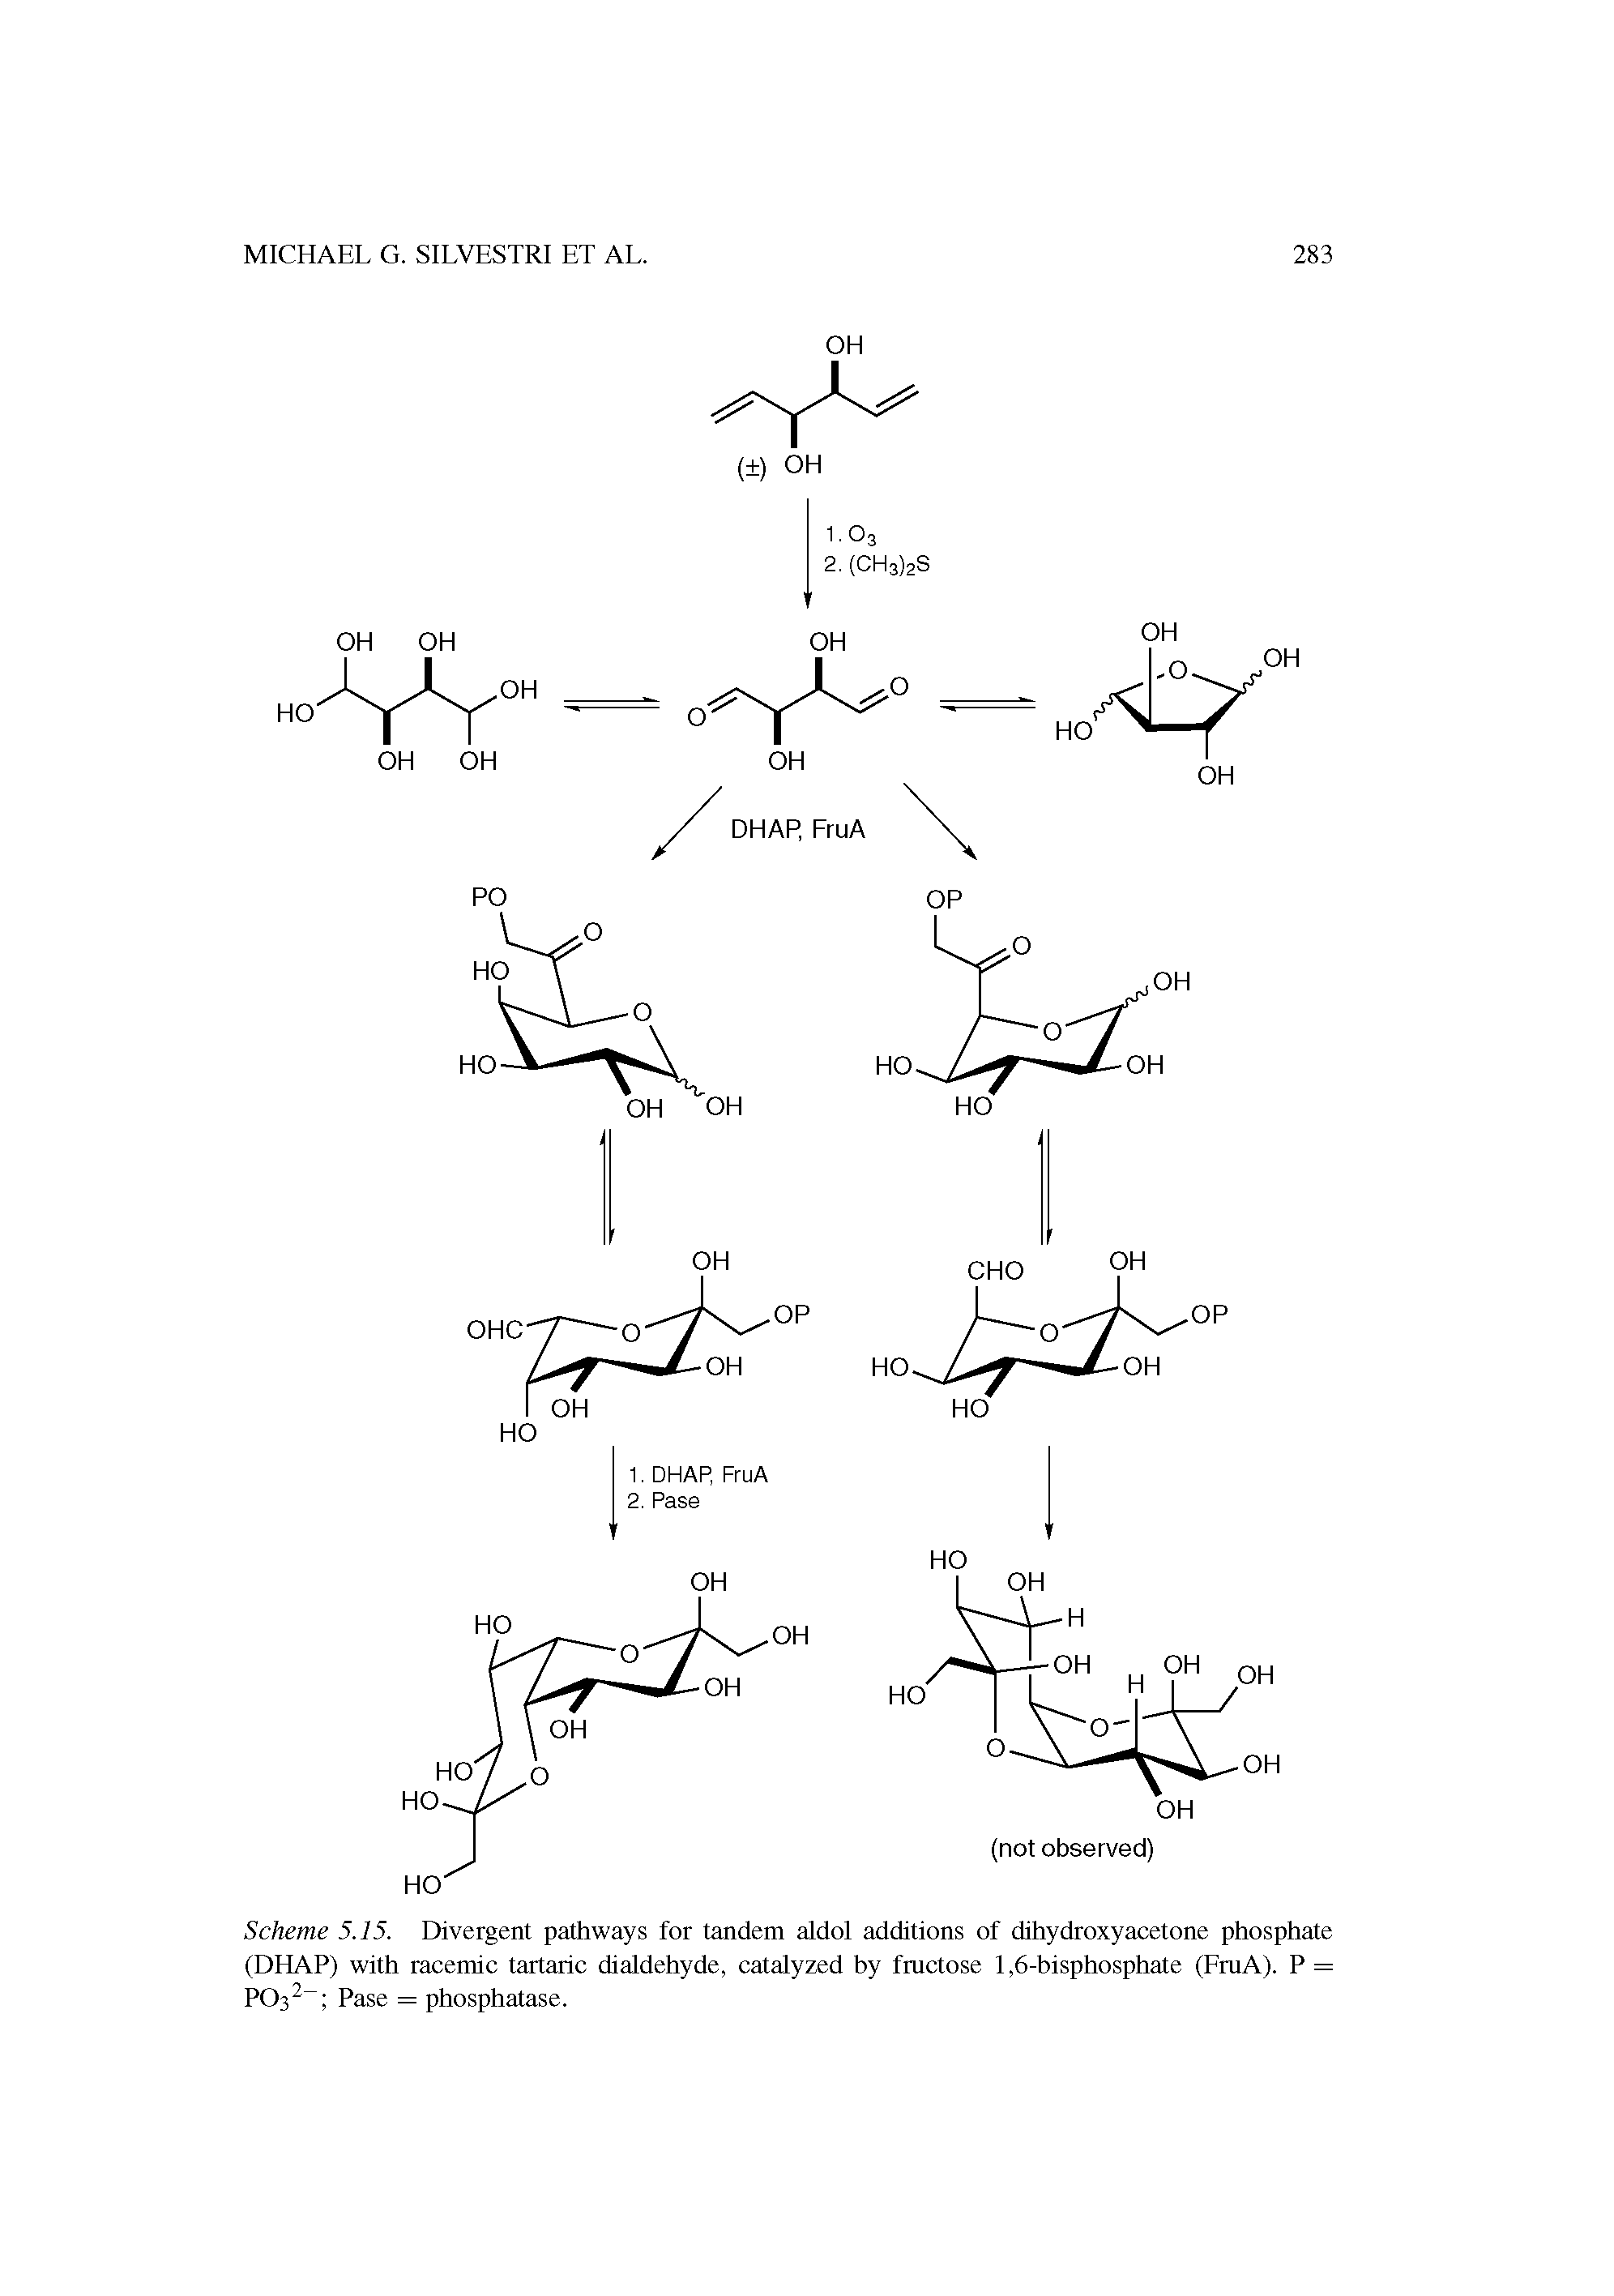 Scheme 5.15. Divergent pathways for tandem aldol additions of dihydroxyacetone phosphate (DHAP) with racemic tartaric dialdehyde, catalyzed by fmctose 1,6-bisphosphate (FruA). P = P032 Pase = phosphatase.